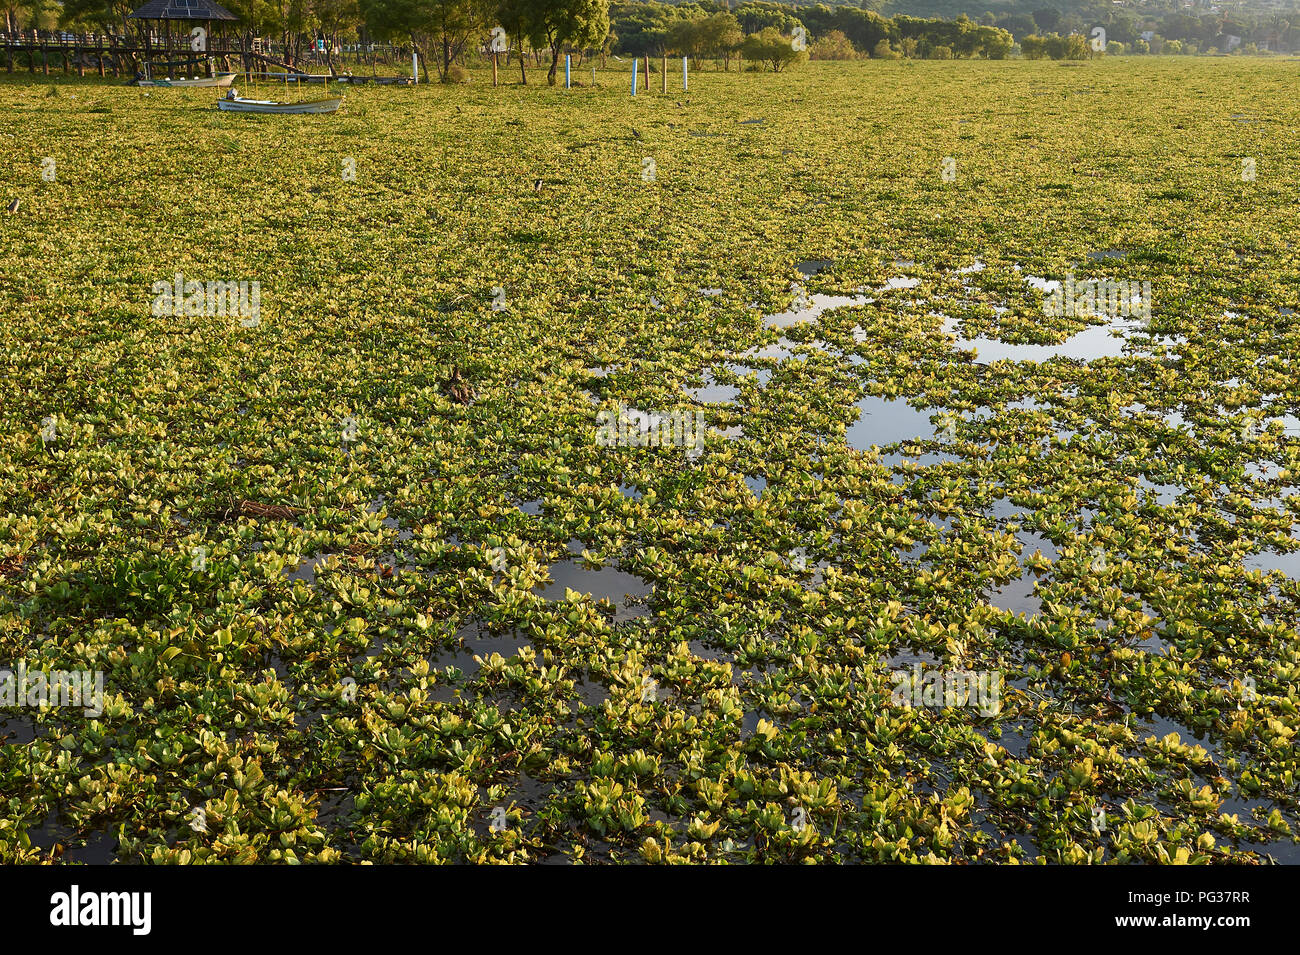 Lake Chapala, Mexico, 23 August 2018. Invasive species water hyacinths (Eichhornia crassipes) blanket Lake Chapala  (Mexicos's largest freshwater lake), Jalisco, Mexico. Despite extensive efforts by the Jalisco Government over a number of years to eradicate this introduced species it continues to spread, 2018 proving worse than ever causing flooding by blocking canals, ditches and pipes and decreasing dissolved oxygen endangering local fish stocks. Credit Peter Llewellyn/Alamy Live News Stock Photo